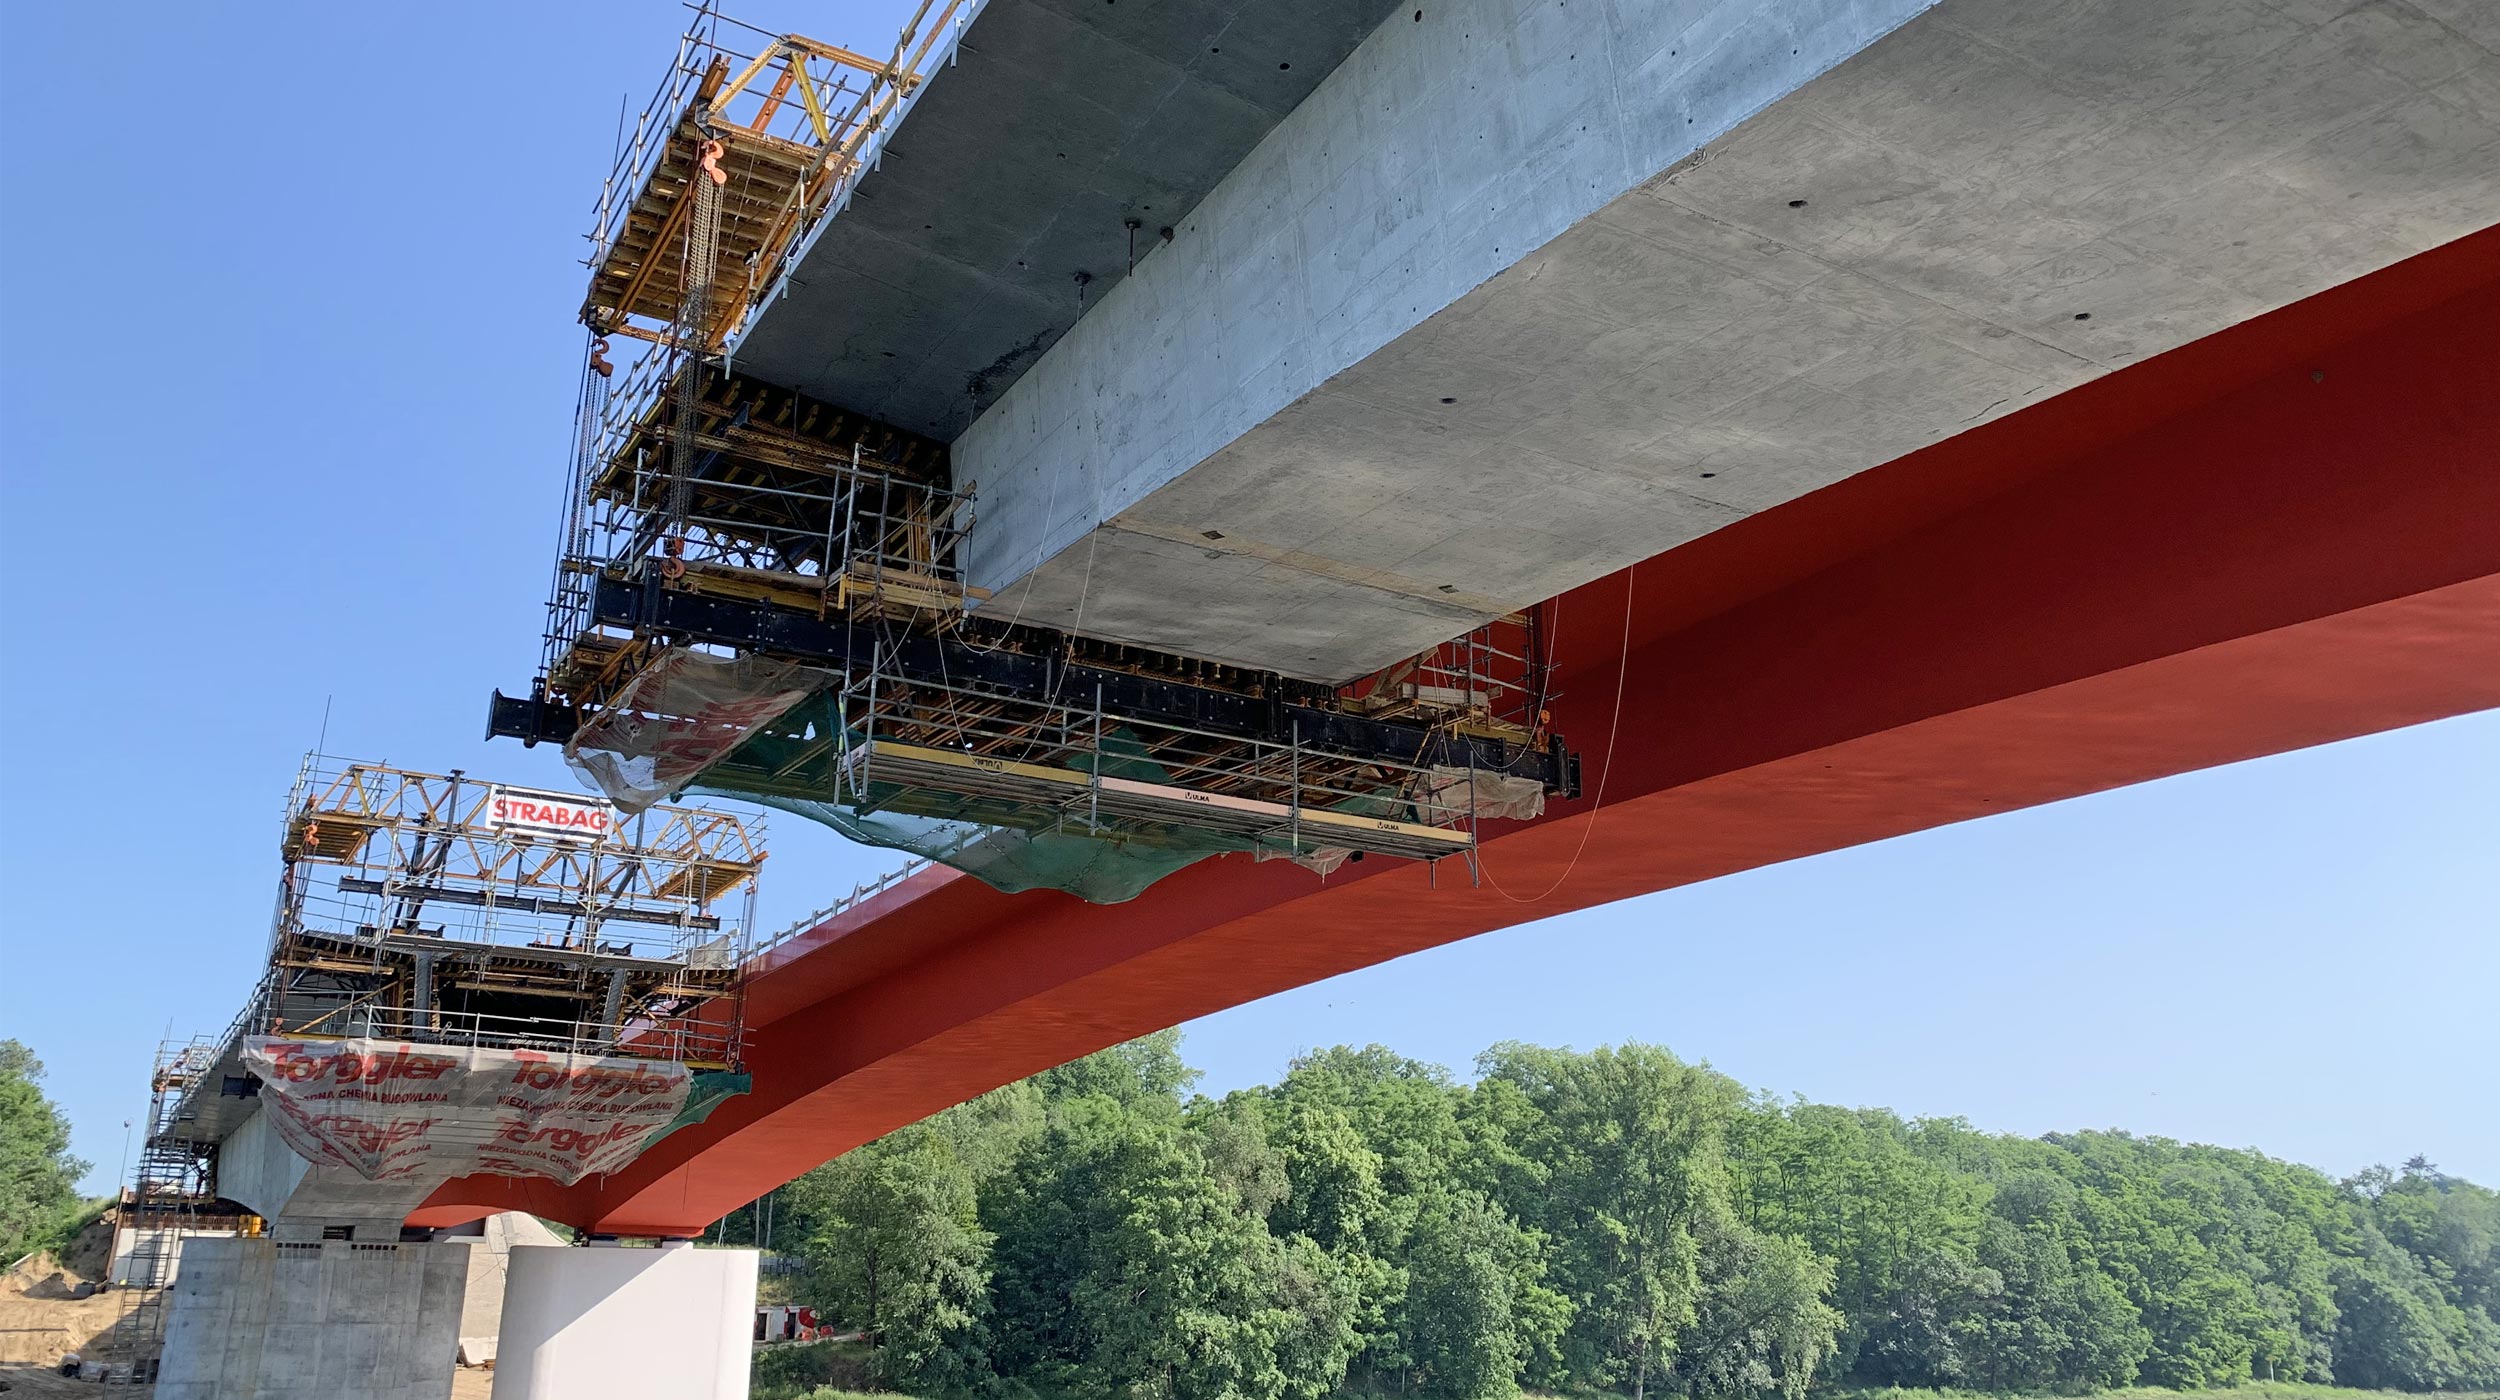 Building the second bridge in Cigacice is the last stage of the construction of the section of the S3 expressway in the Lubuskie Voivodeship, Poland.